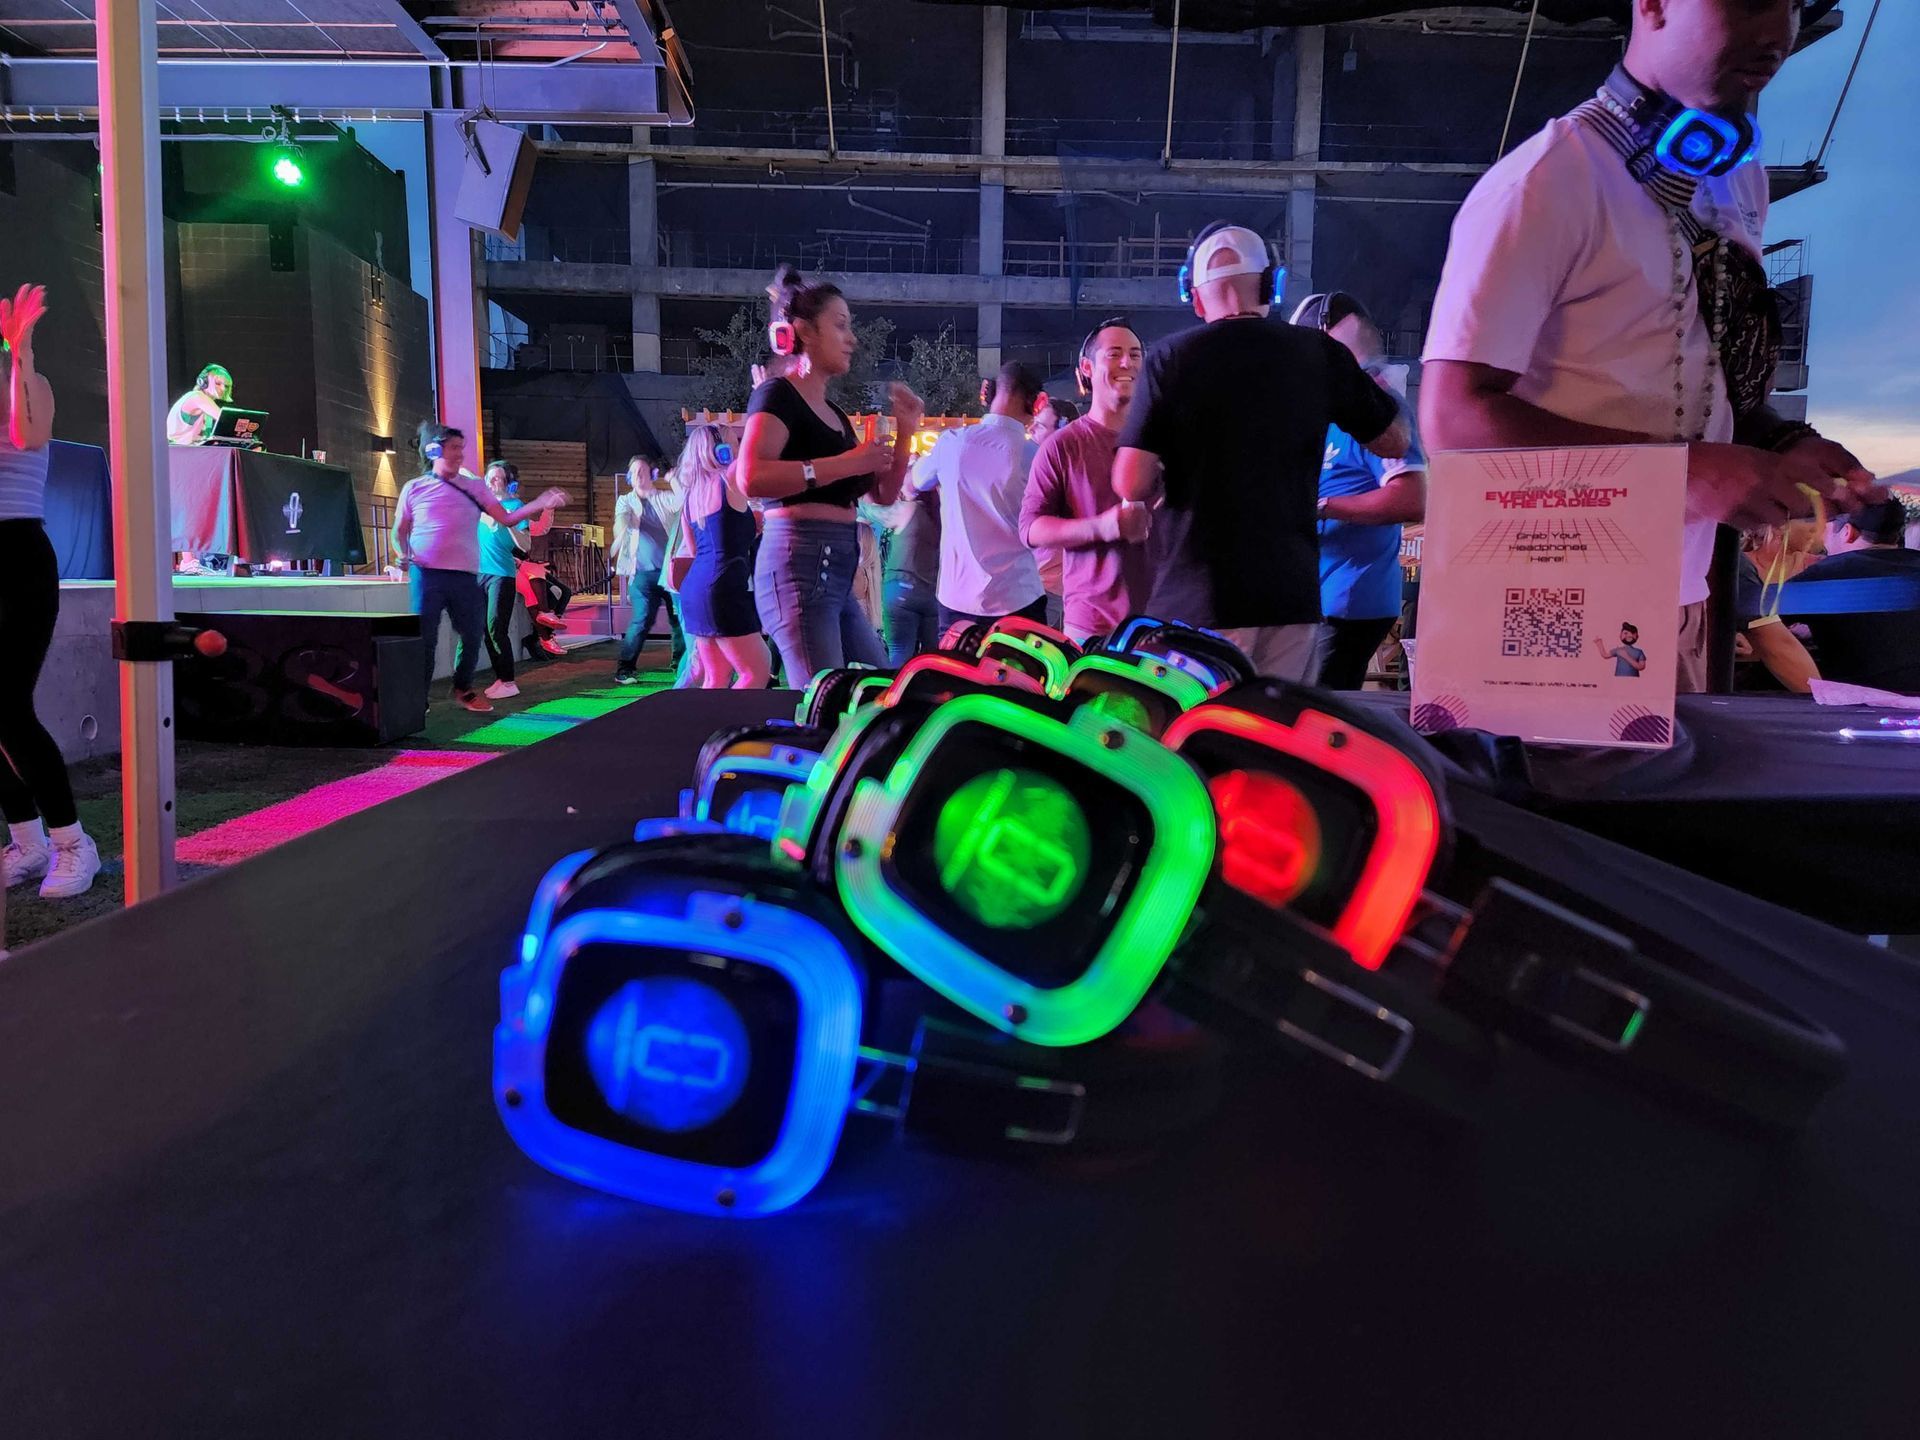 Event picture with silent disco headphones